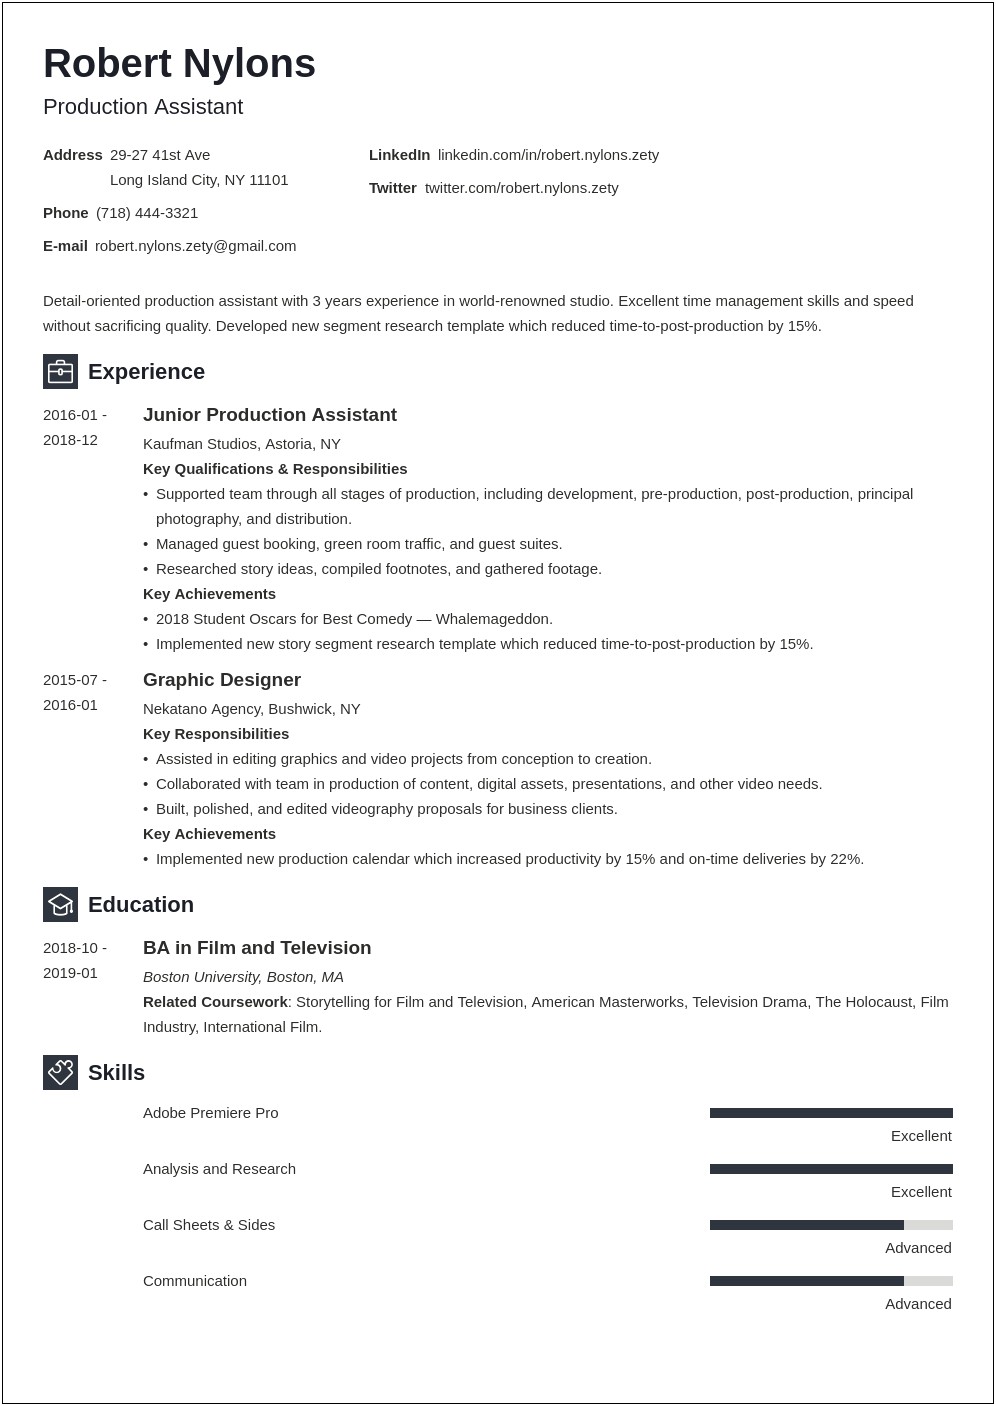 Resume Objectives For Film Production Assistant